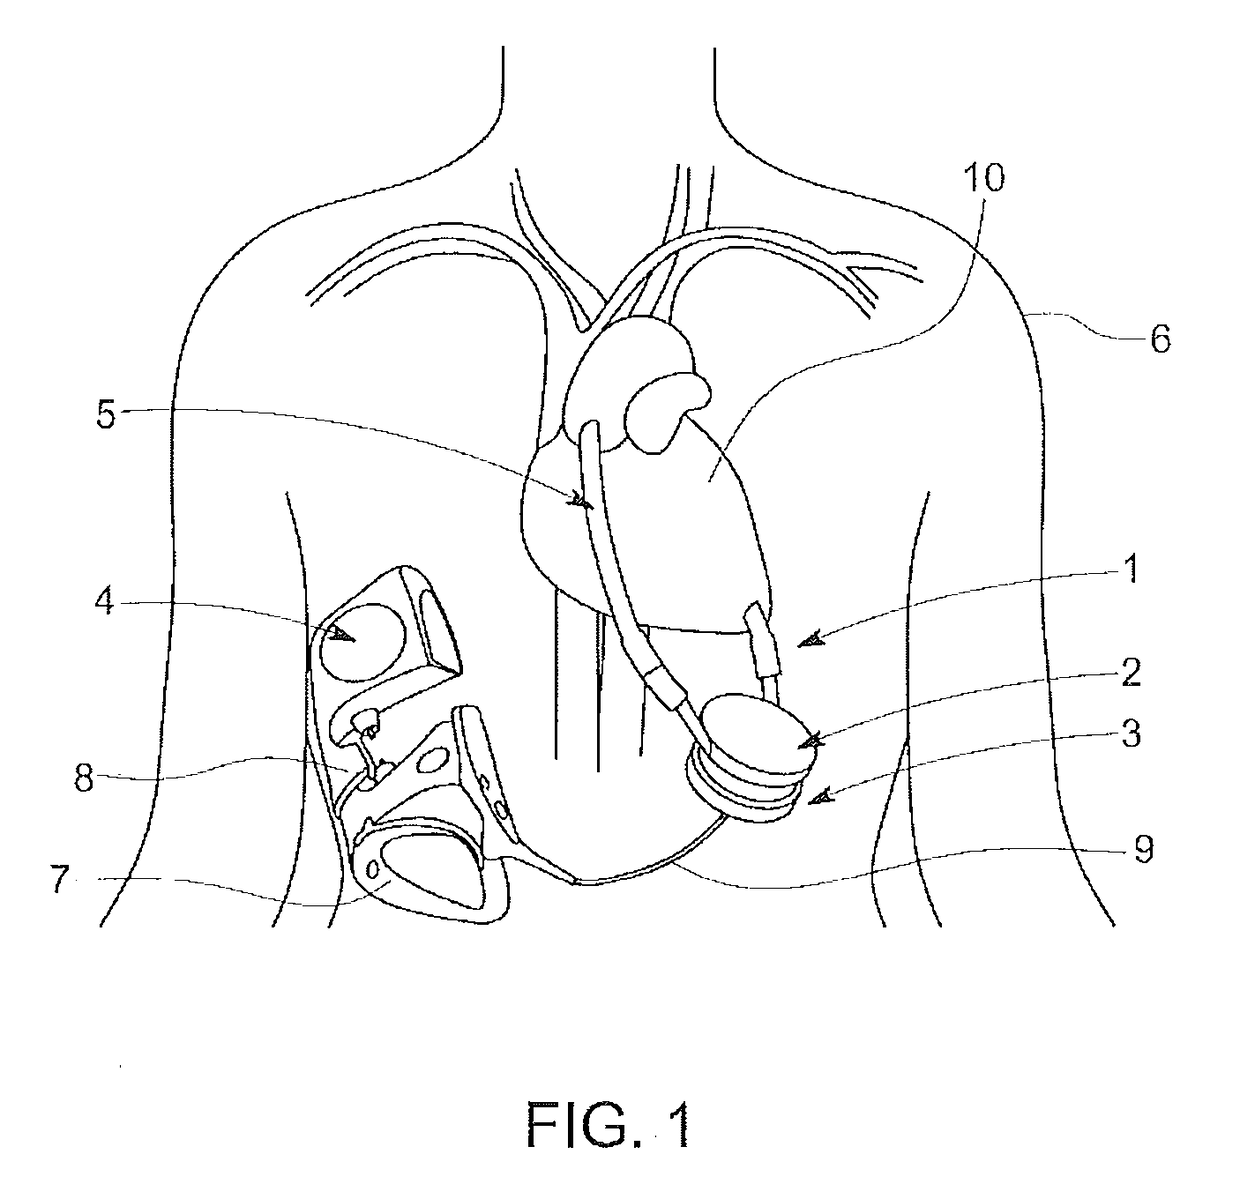 Low cost ventricular device and system thereof